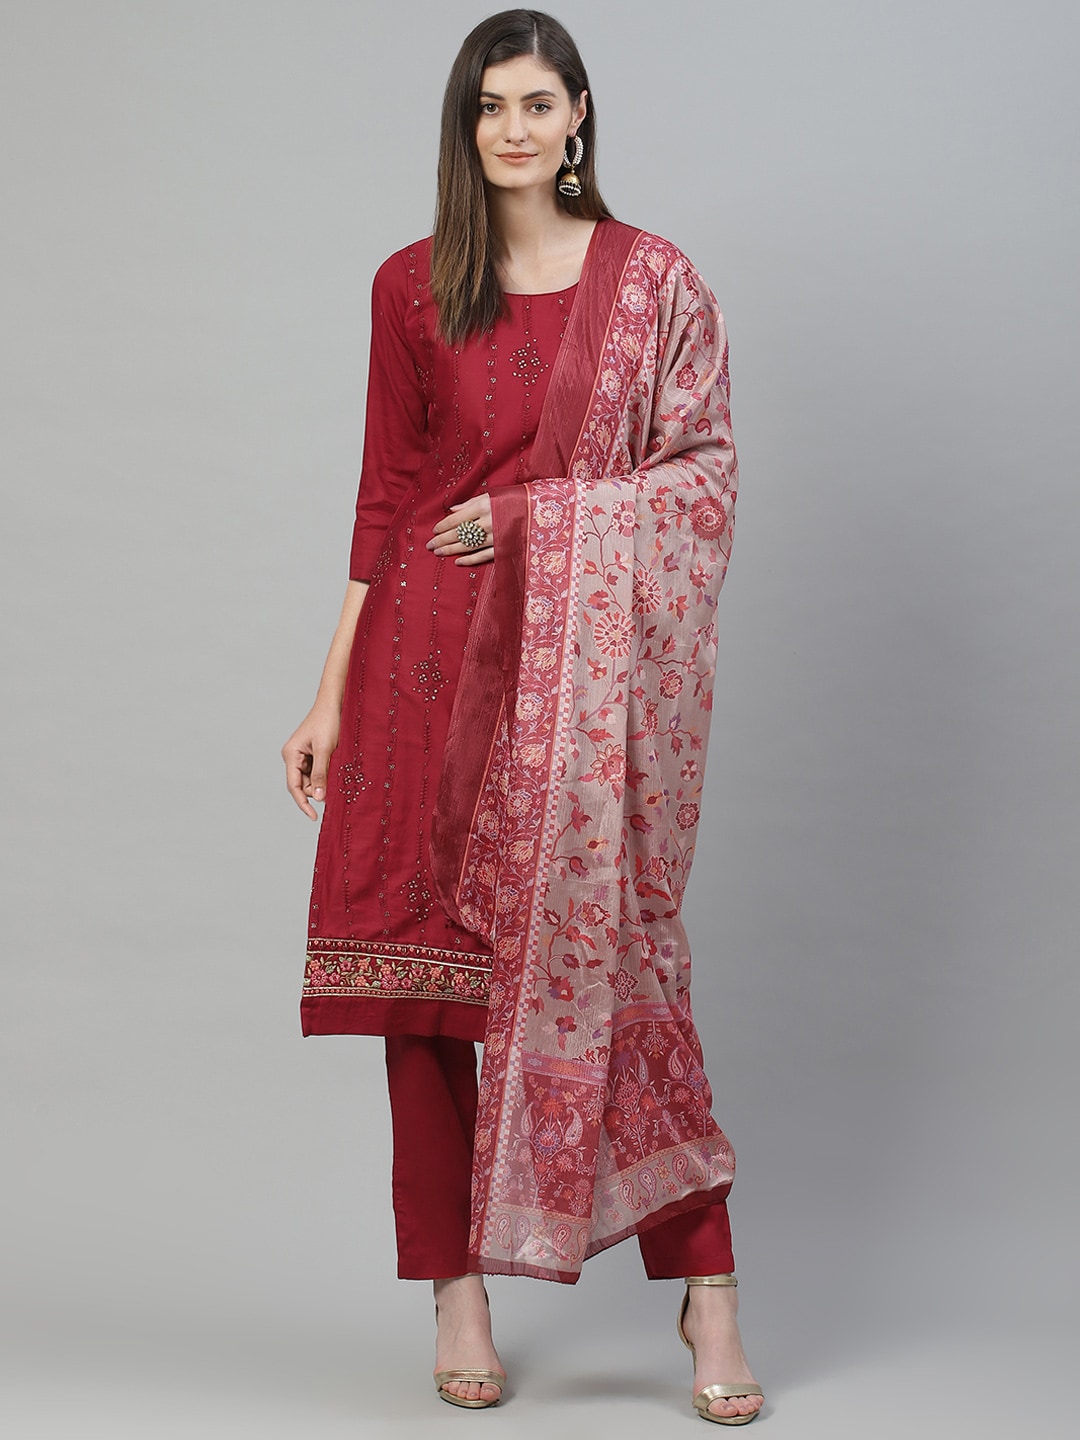 Inddus Maroon & Golden Embroidered Unstitched Dress Material With Dupatta Price in India